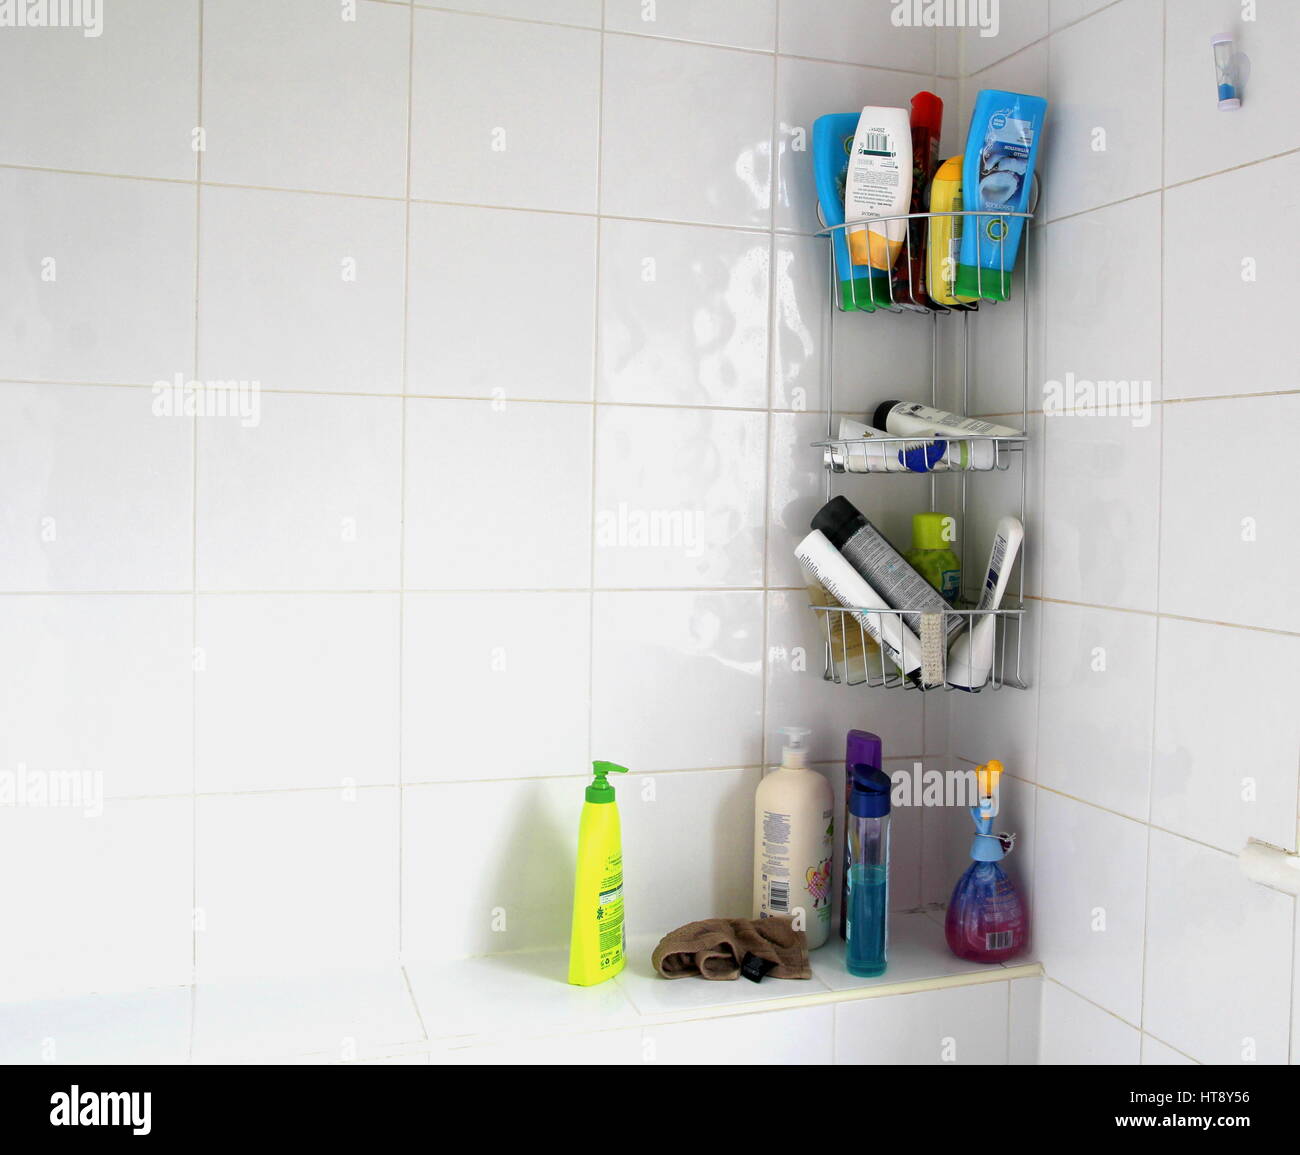 Camberley, UK - March 8th 2017: Various shampoo and shower gel products in a domestic bathroom Stock Photo